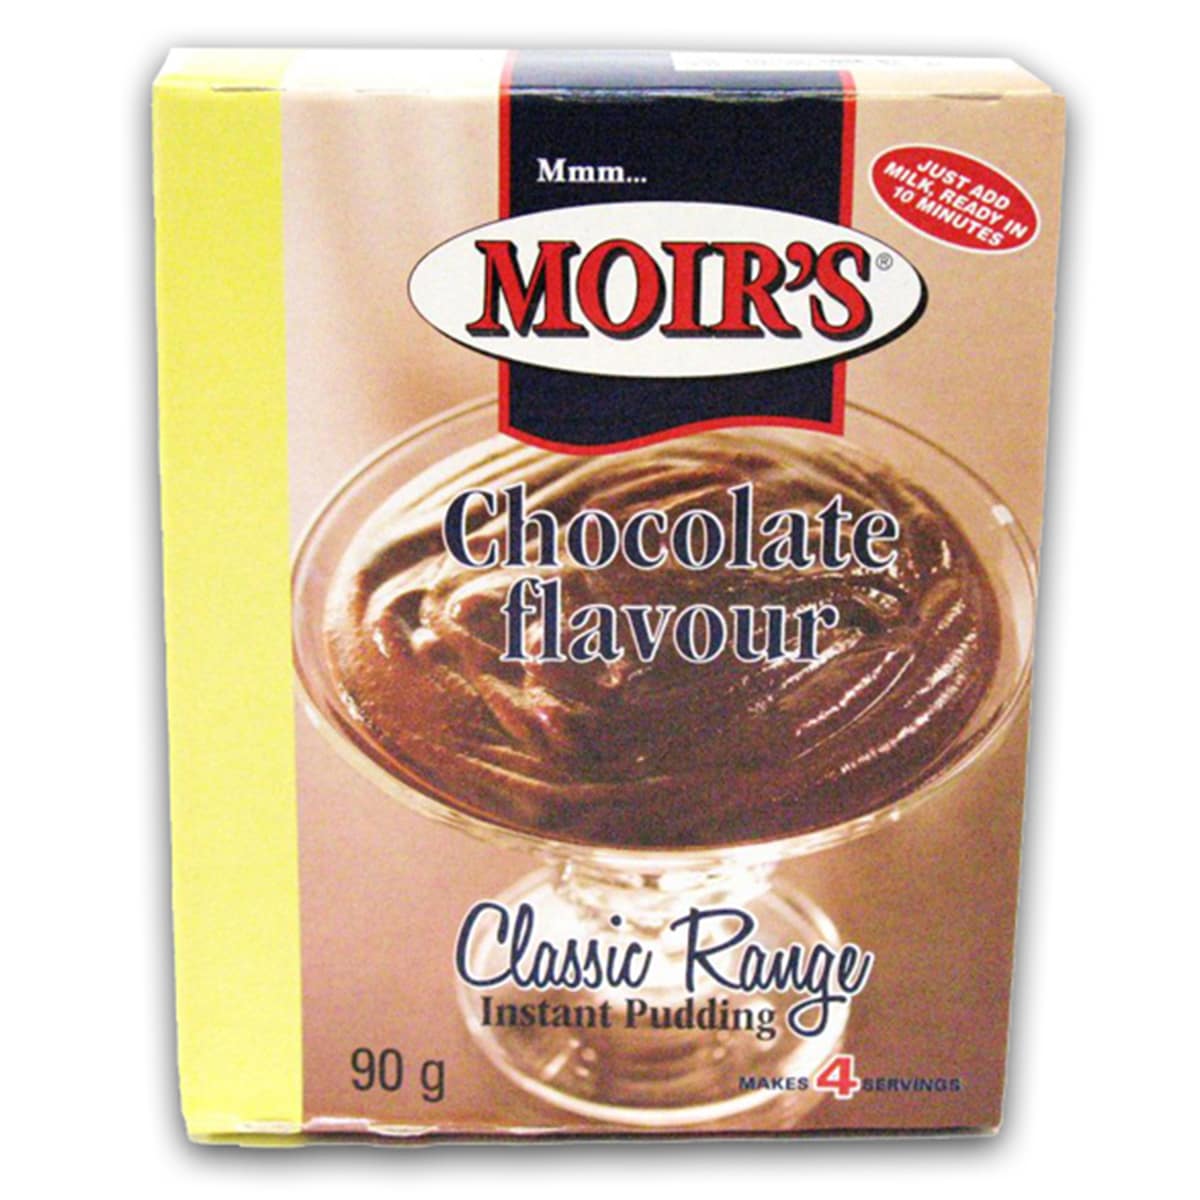 Buy Moirs Chocolate Flavour Instant Pudding - 90 gm